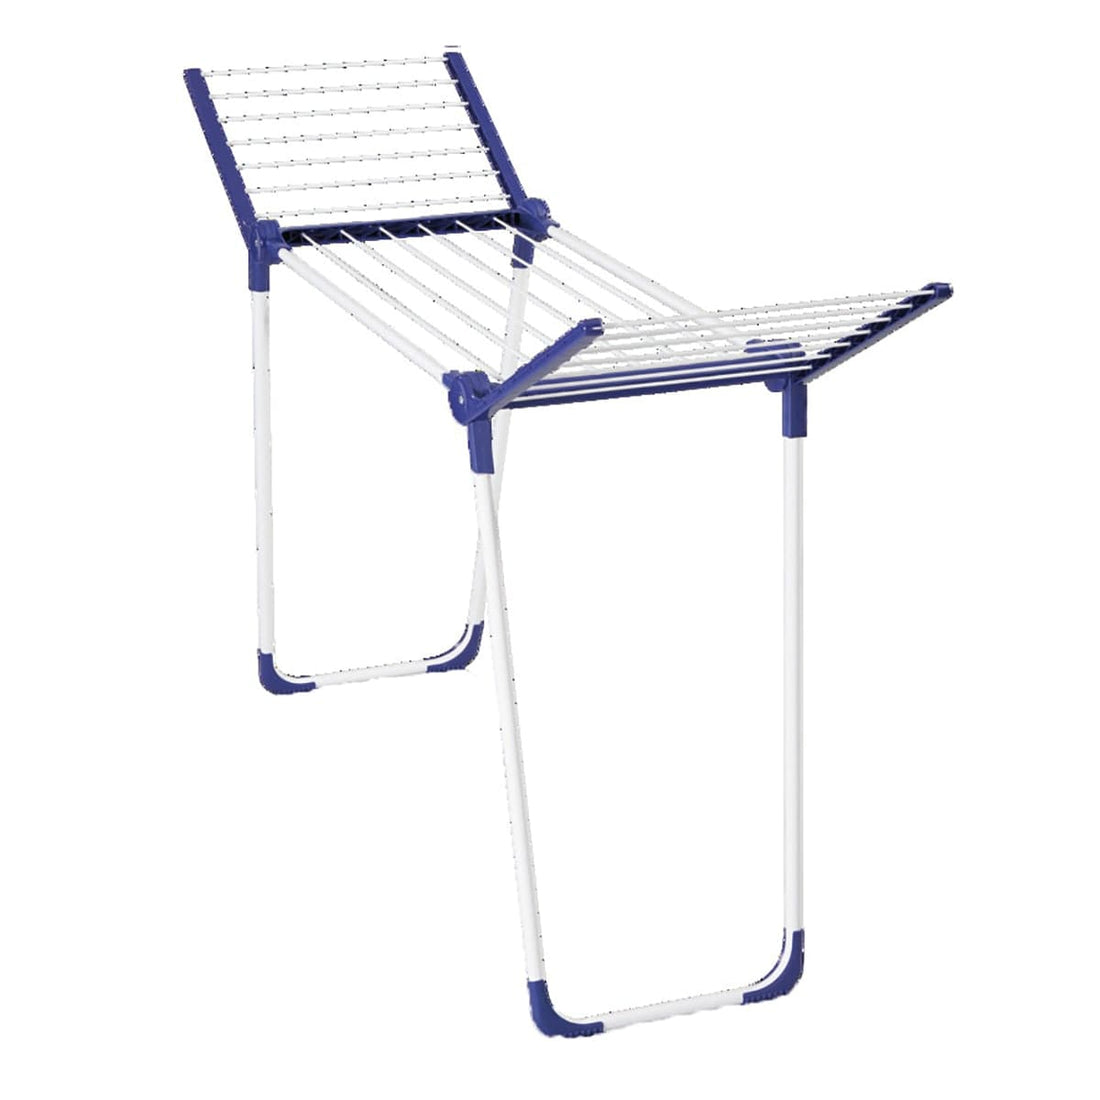 PEGASUS 120 SOLID COMPACT 12-METRE DRYING RACK - best price from Maltashopper.com BR430008246